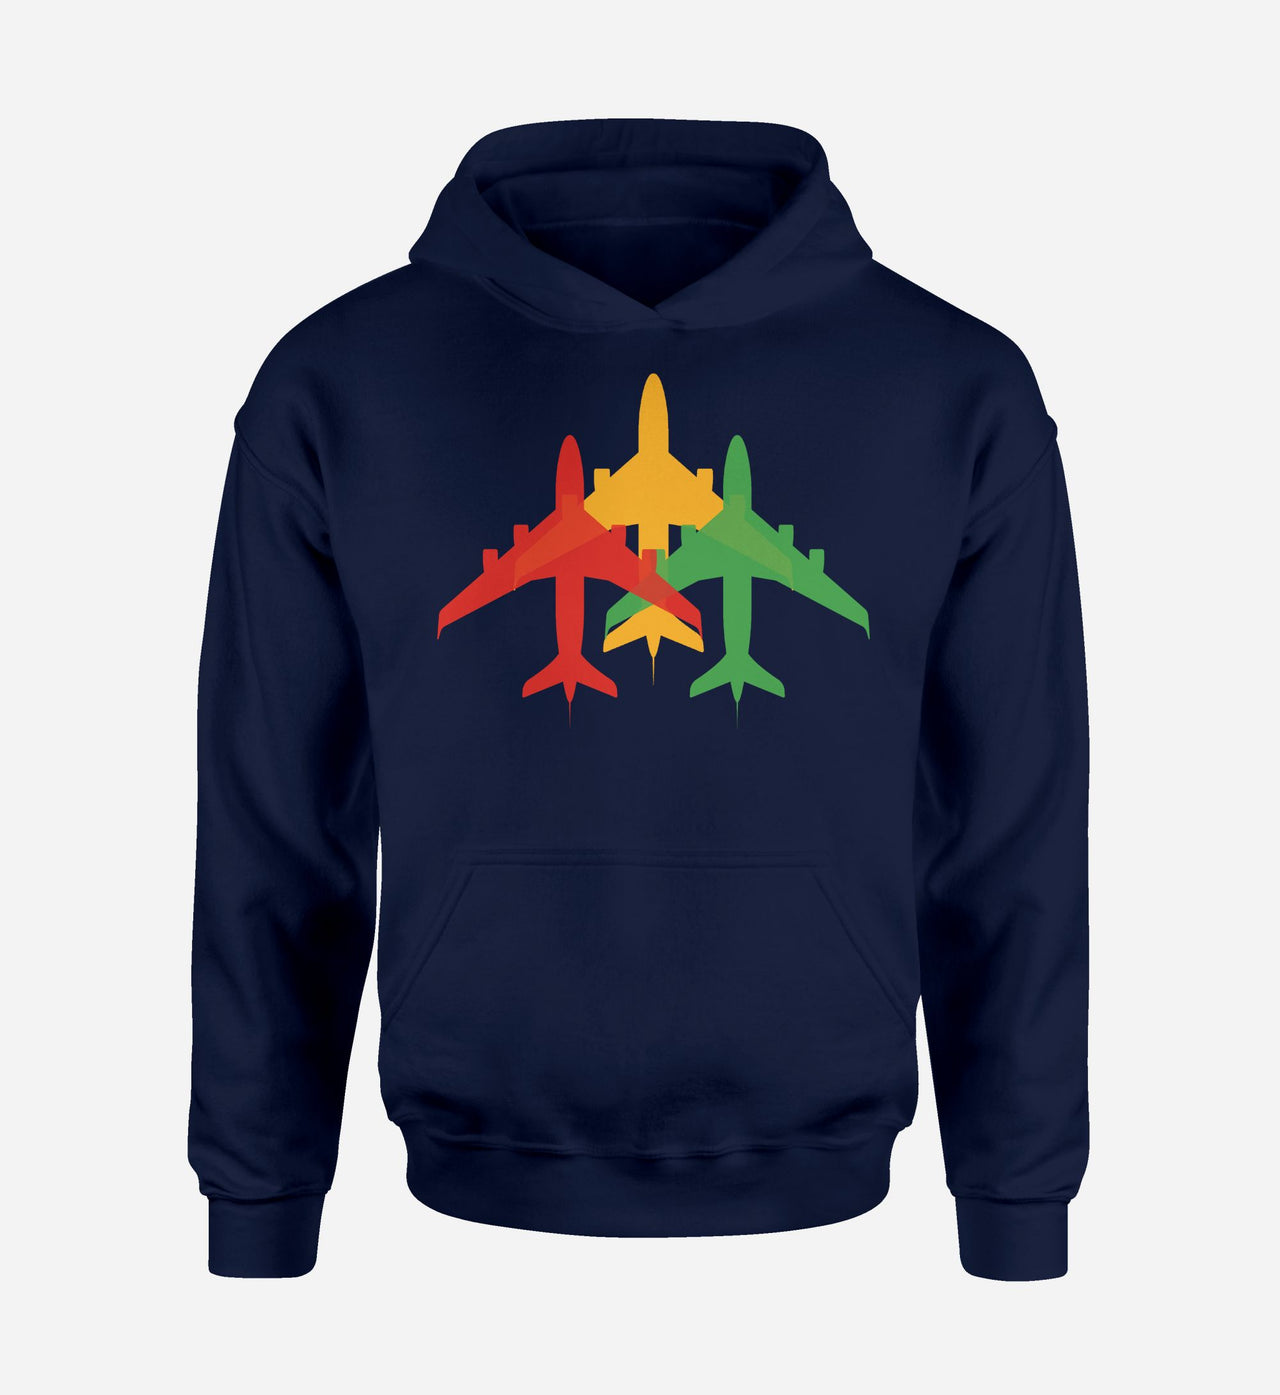 Colourful 3 Airplanes Designed Hoodies